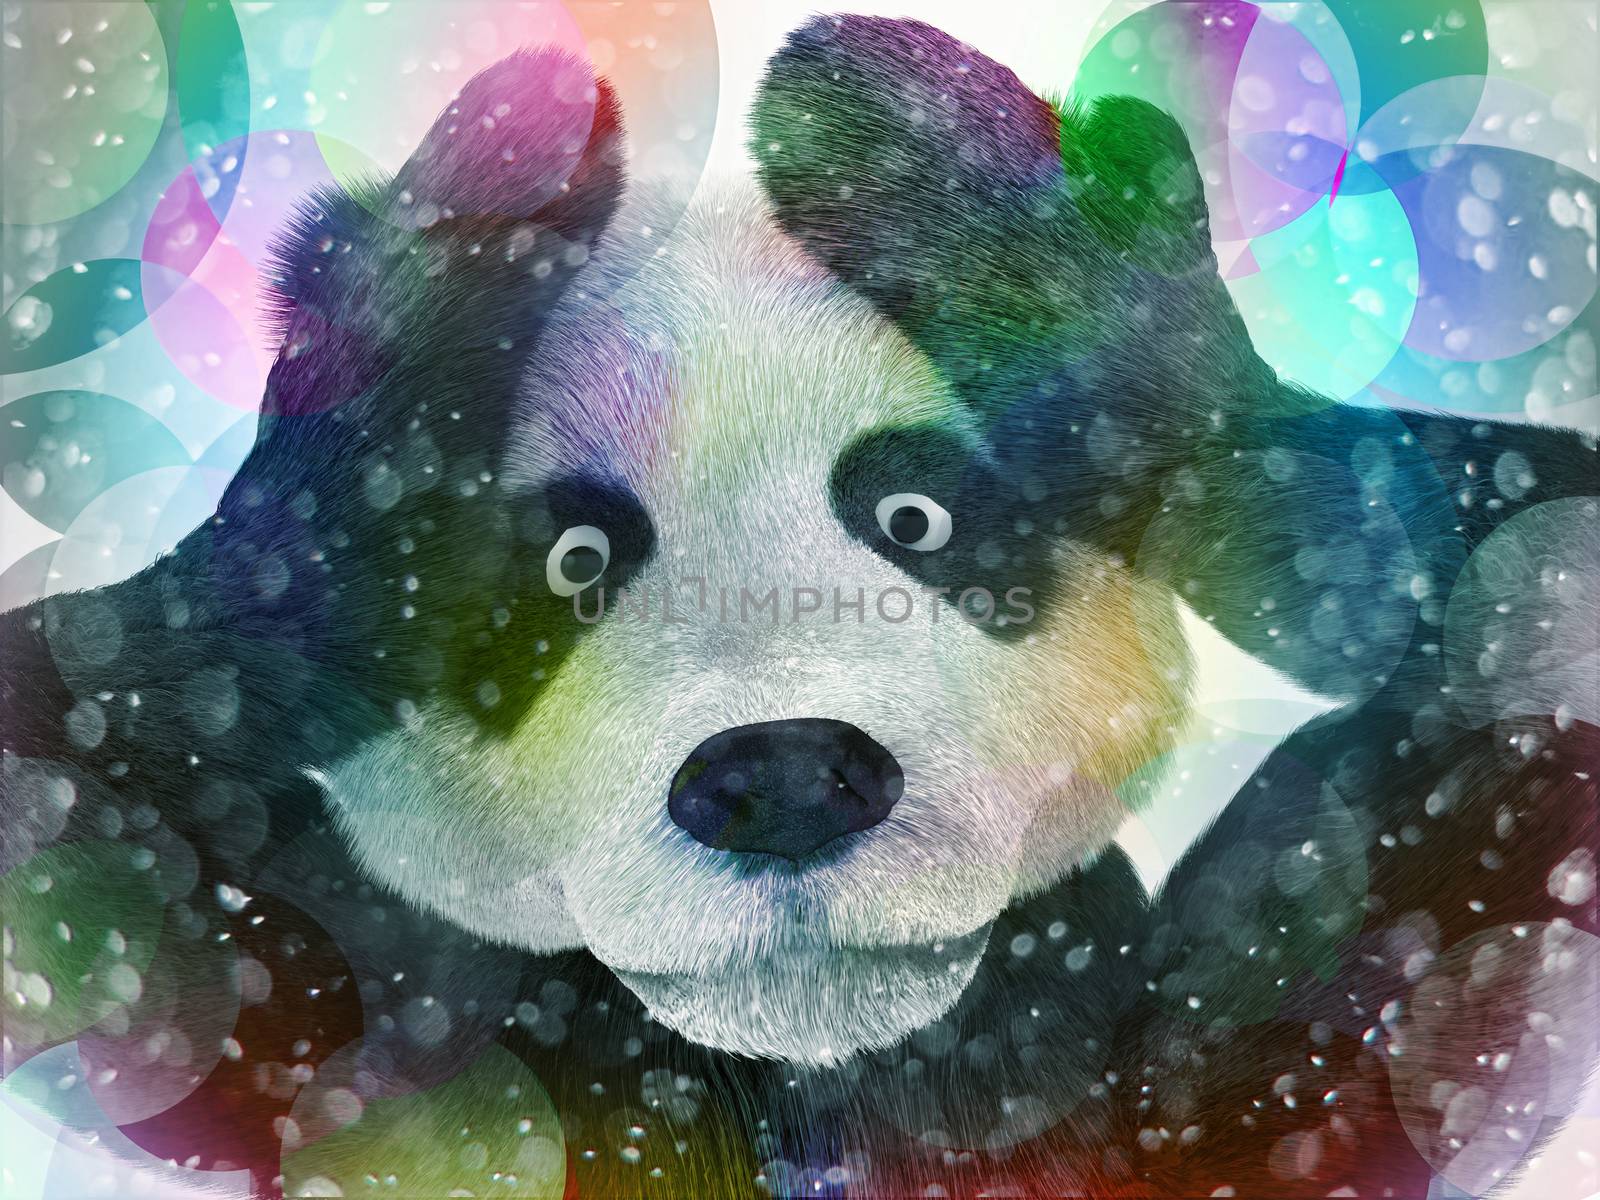 sick character panda bamboo junkie experiencing strong hallucinations and fear closes the muzzle paws. Psychedelic condition of the animal. by xtate